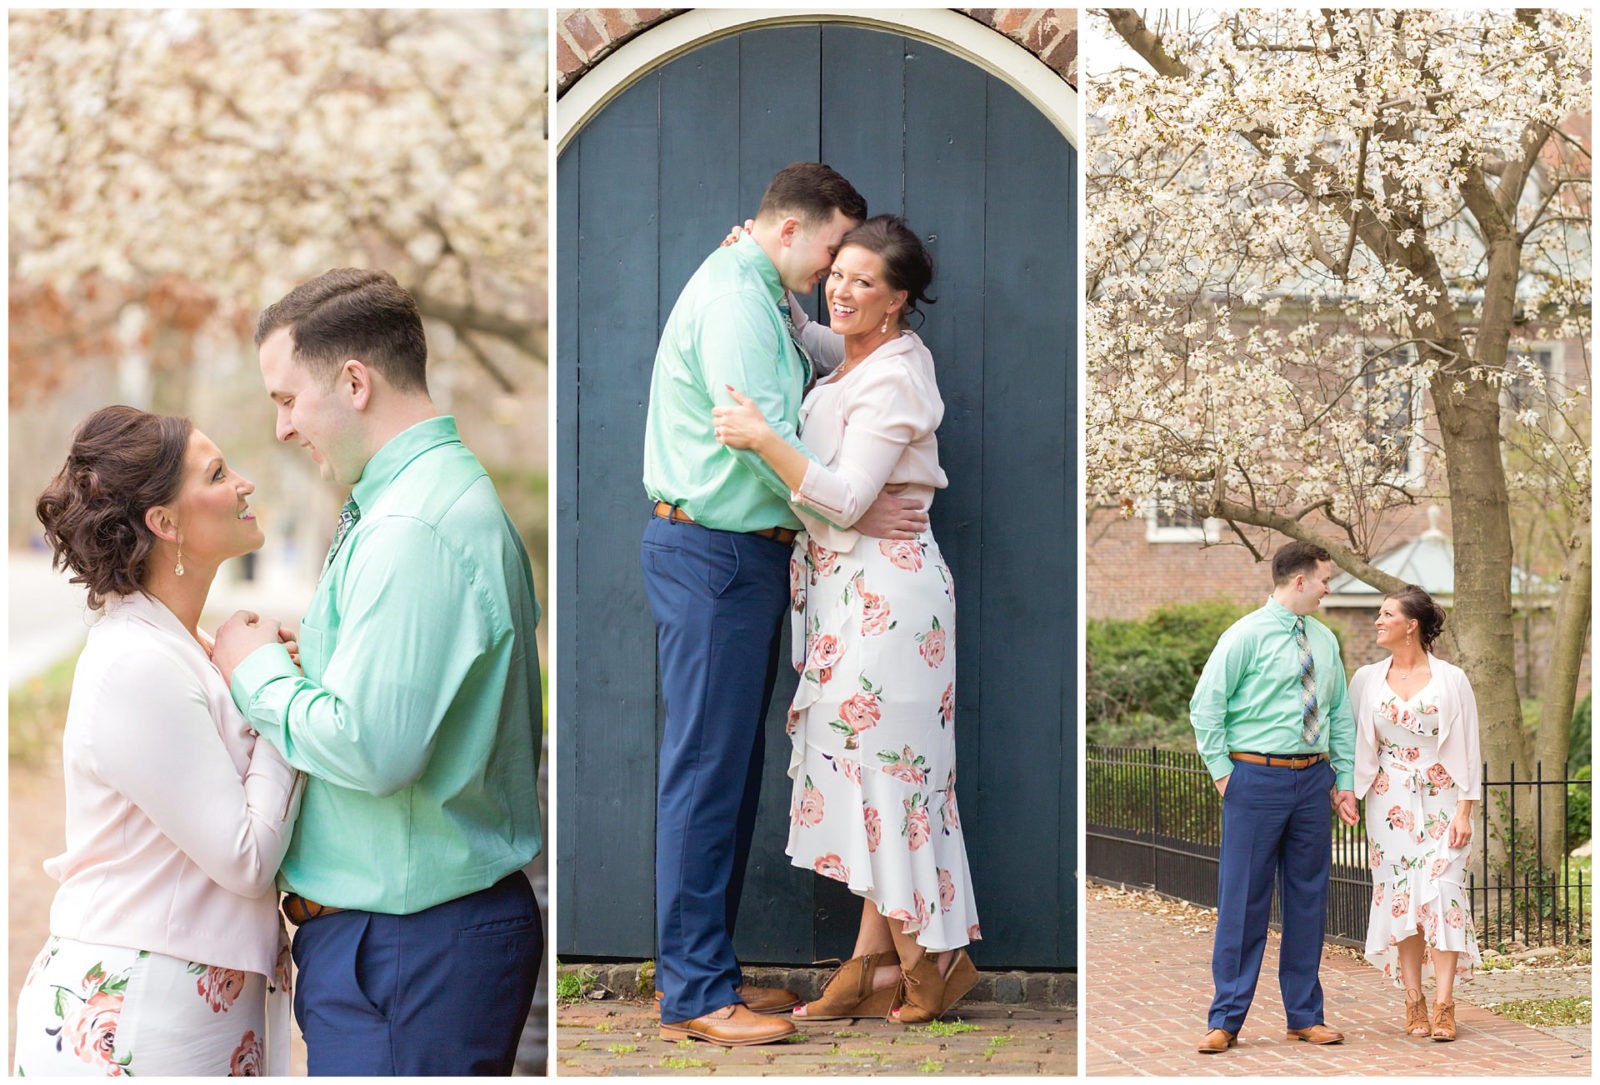 Spring engagement session in Downtown in Lexington, Kentucky.